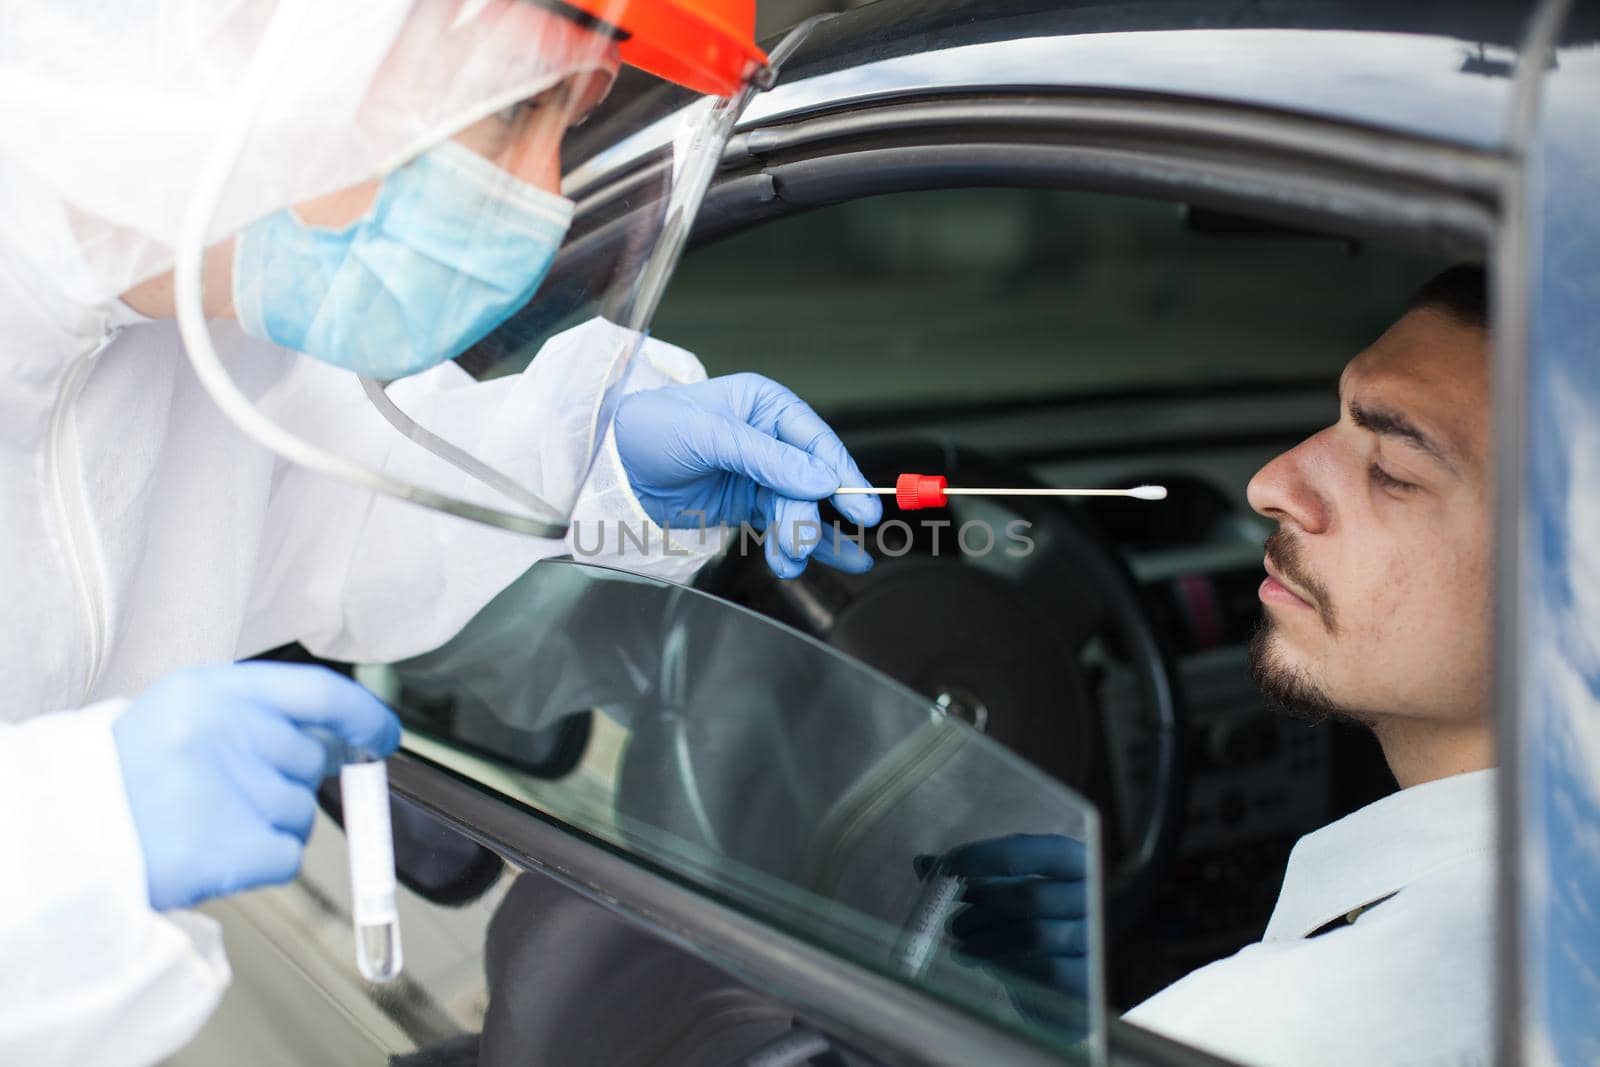 Drive-thru Coronavirus COVID-19 test,paramedic in personal protective equipment & face shield performing nasal swab through car window on male patient sitting in vehicle,mobile US testing site center